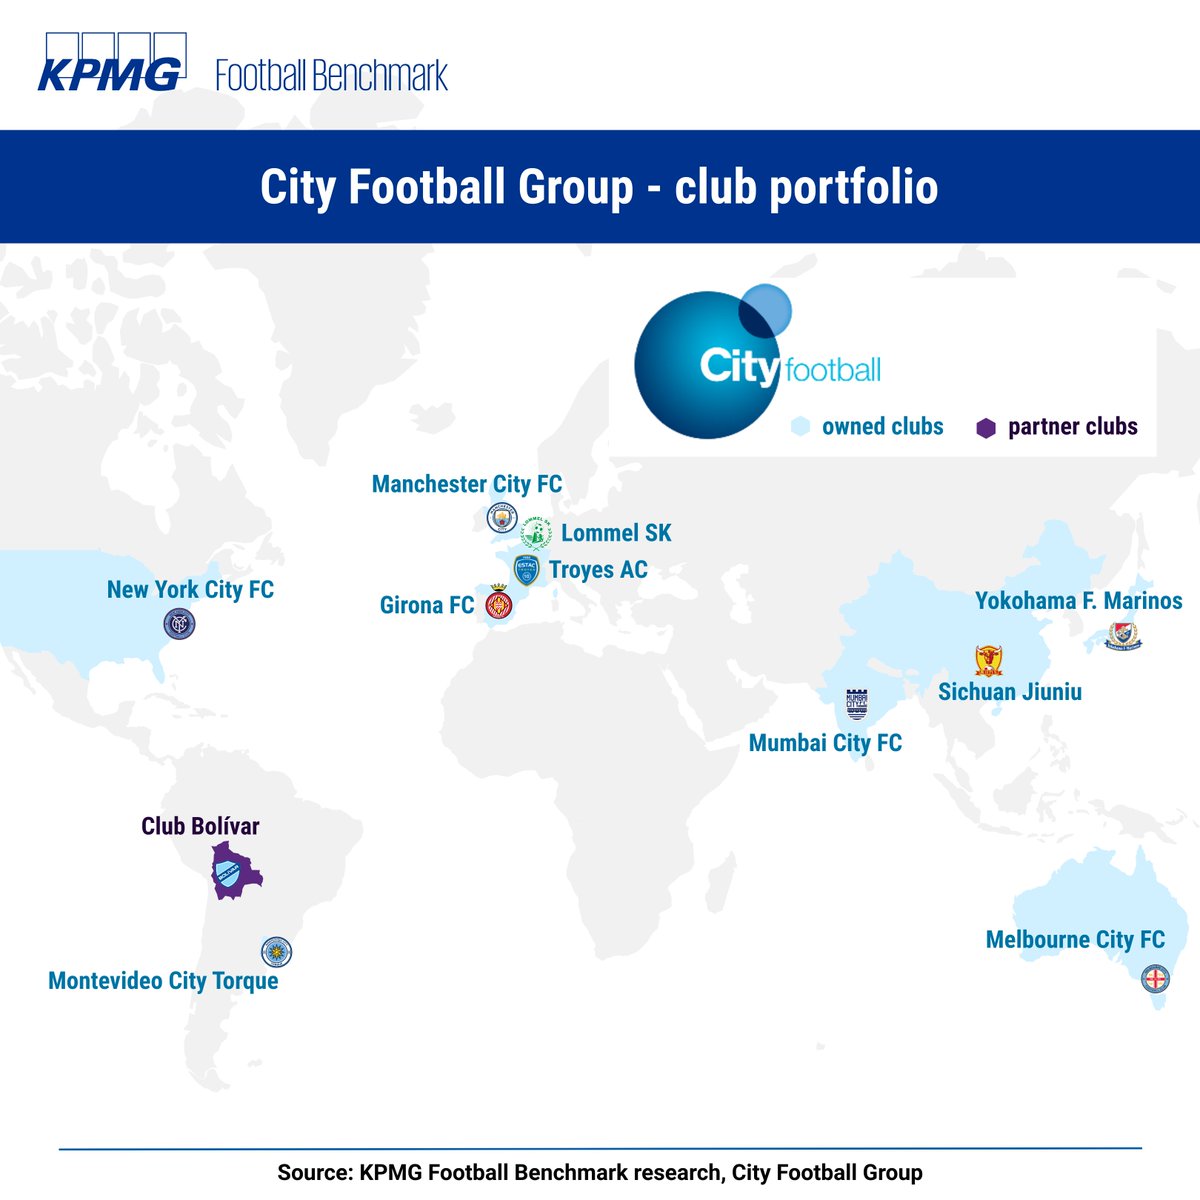 Kpmg Football Benchmark A Twitter City Football Group Cfg Has Reportedly Raised Usd 650m In A Debt Deal It Will Be Used To Fund Infrastructure Projects Of Cfg S Football Clubs And To